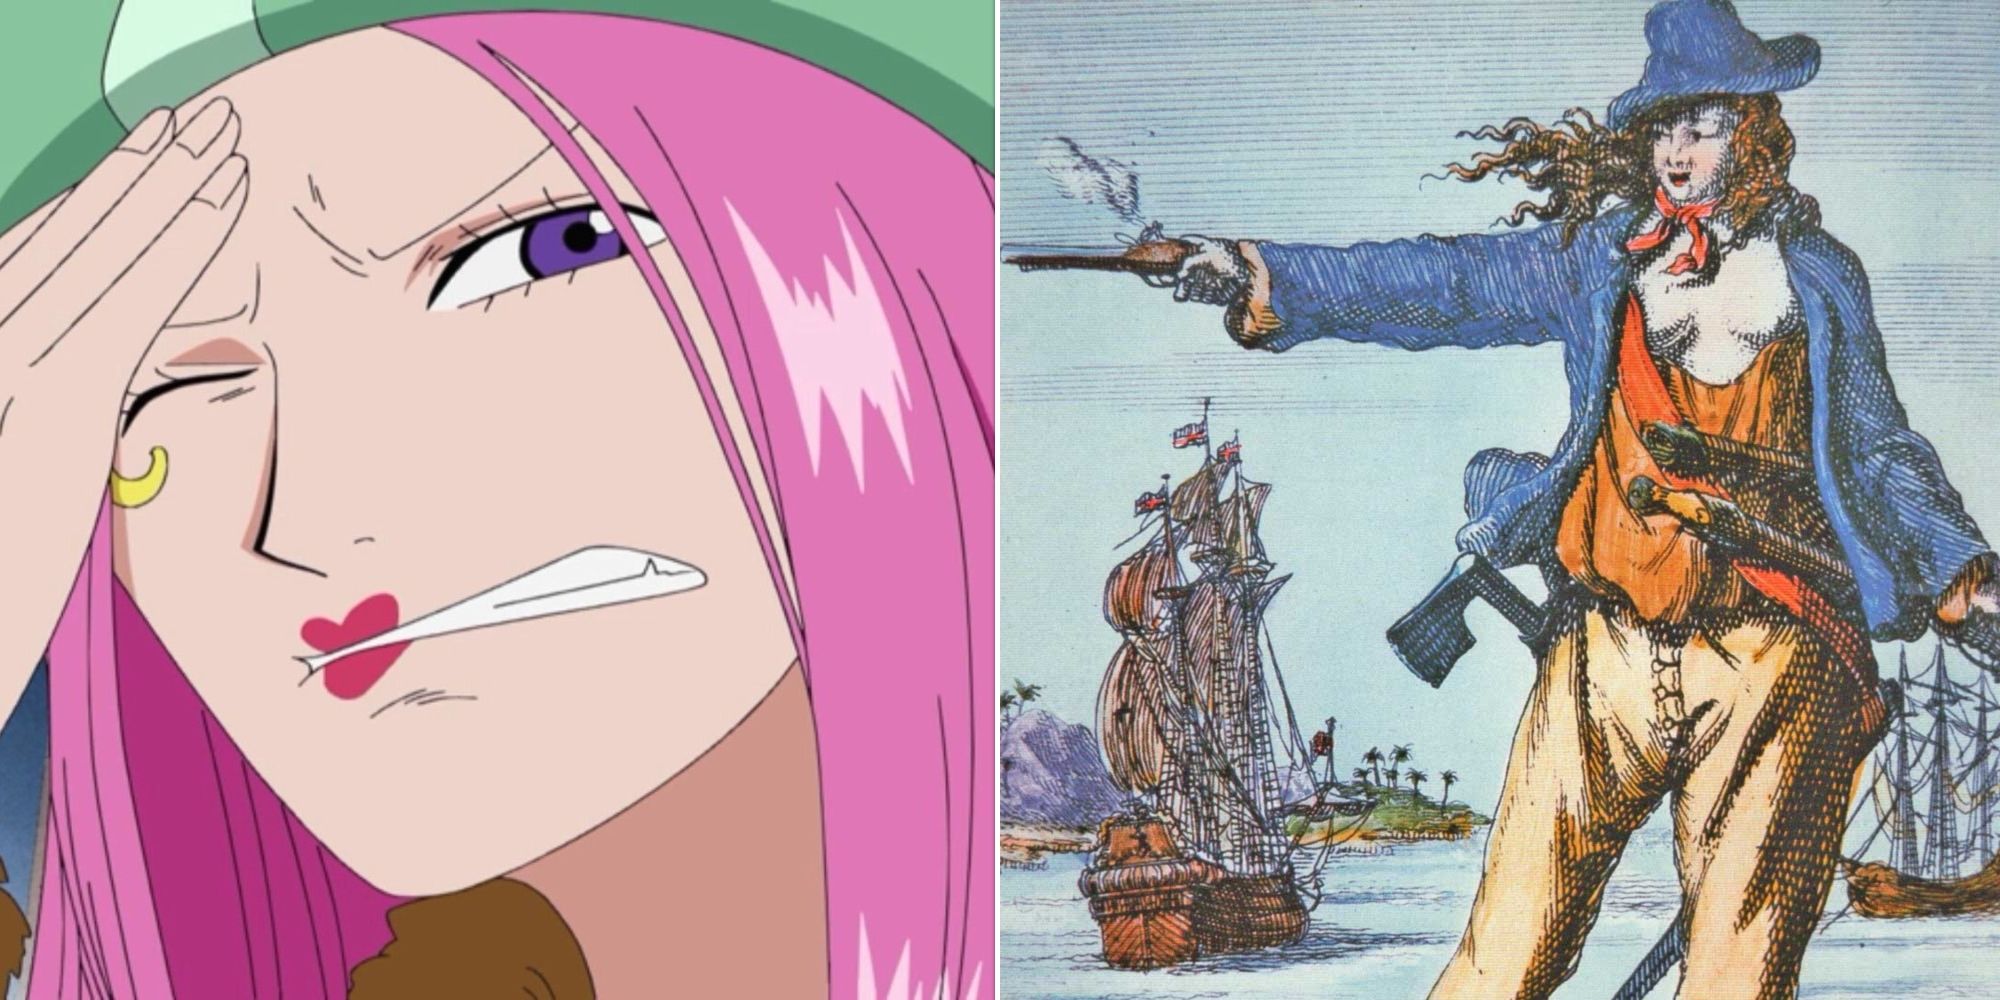 Jewley Bonney from One Piece and the pirate Anne Bonny